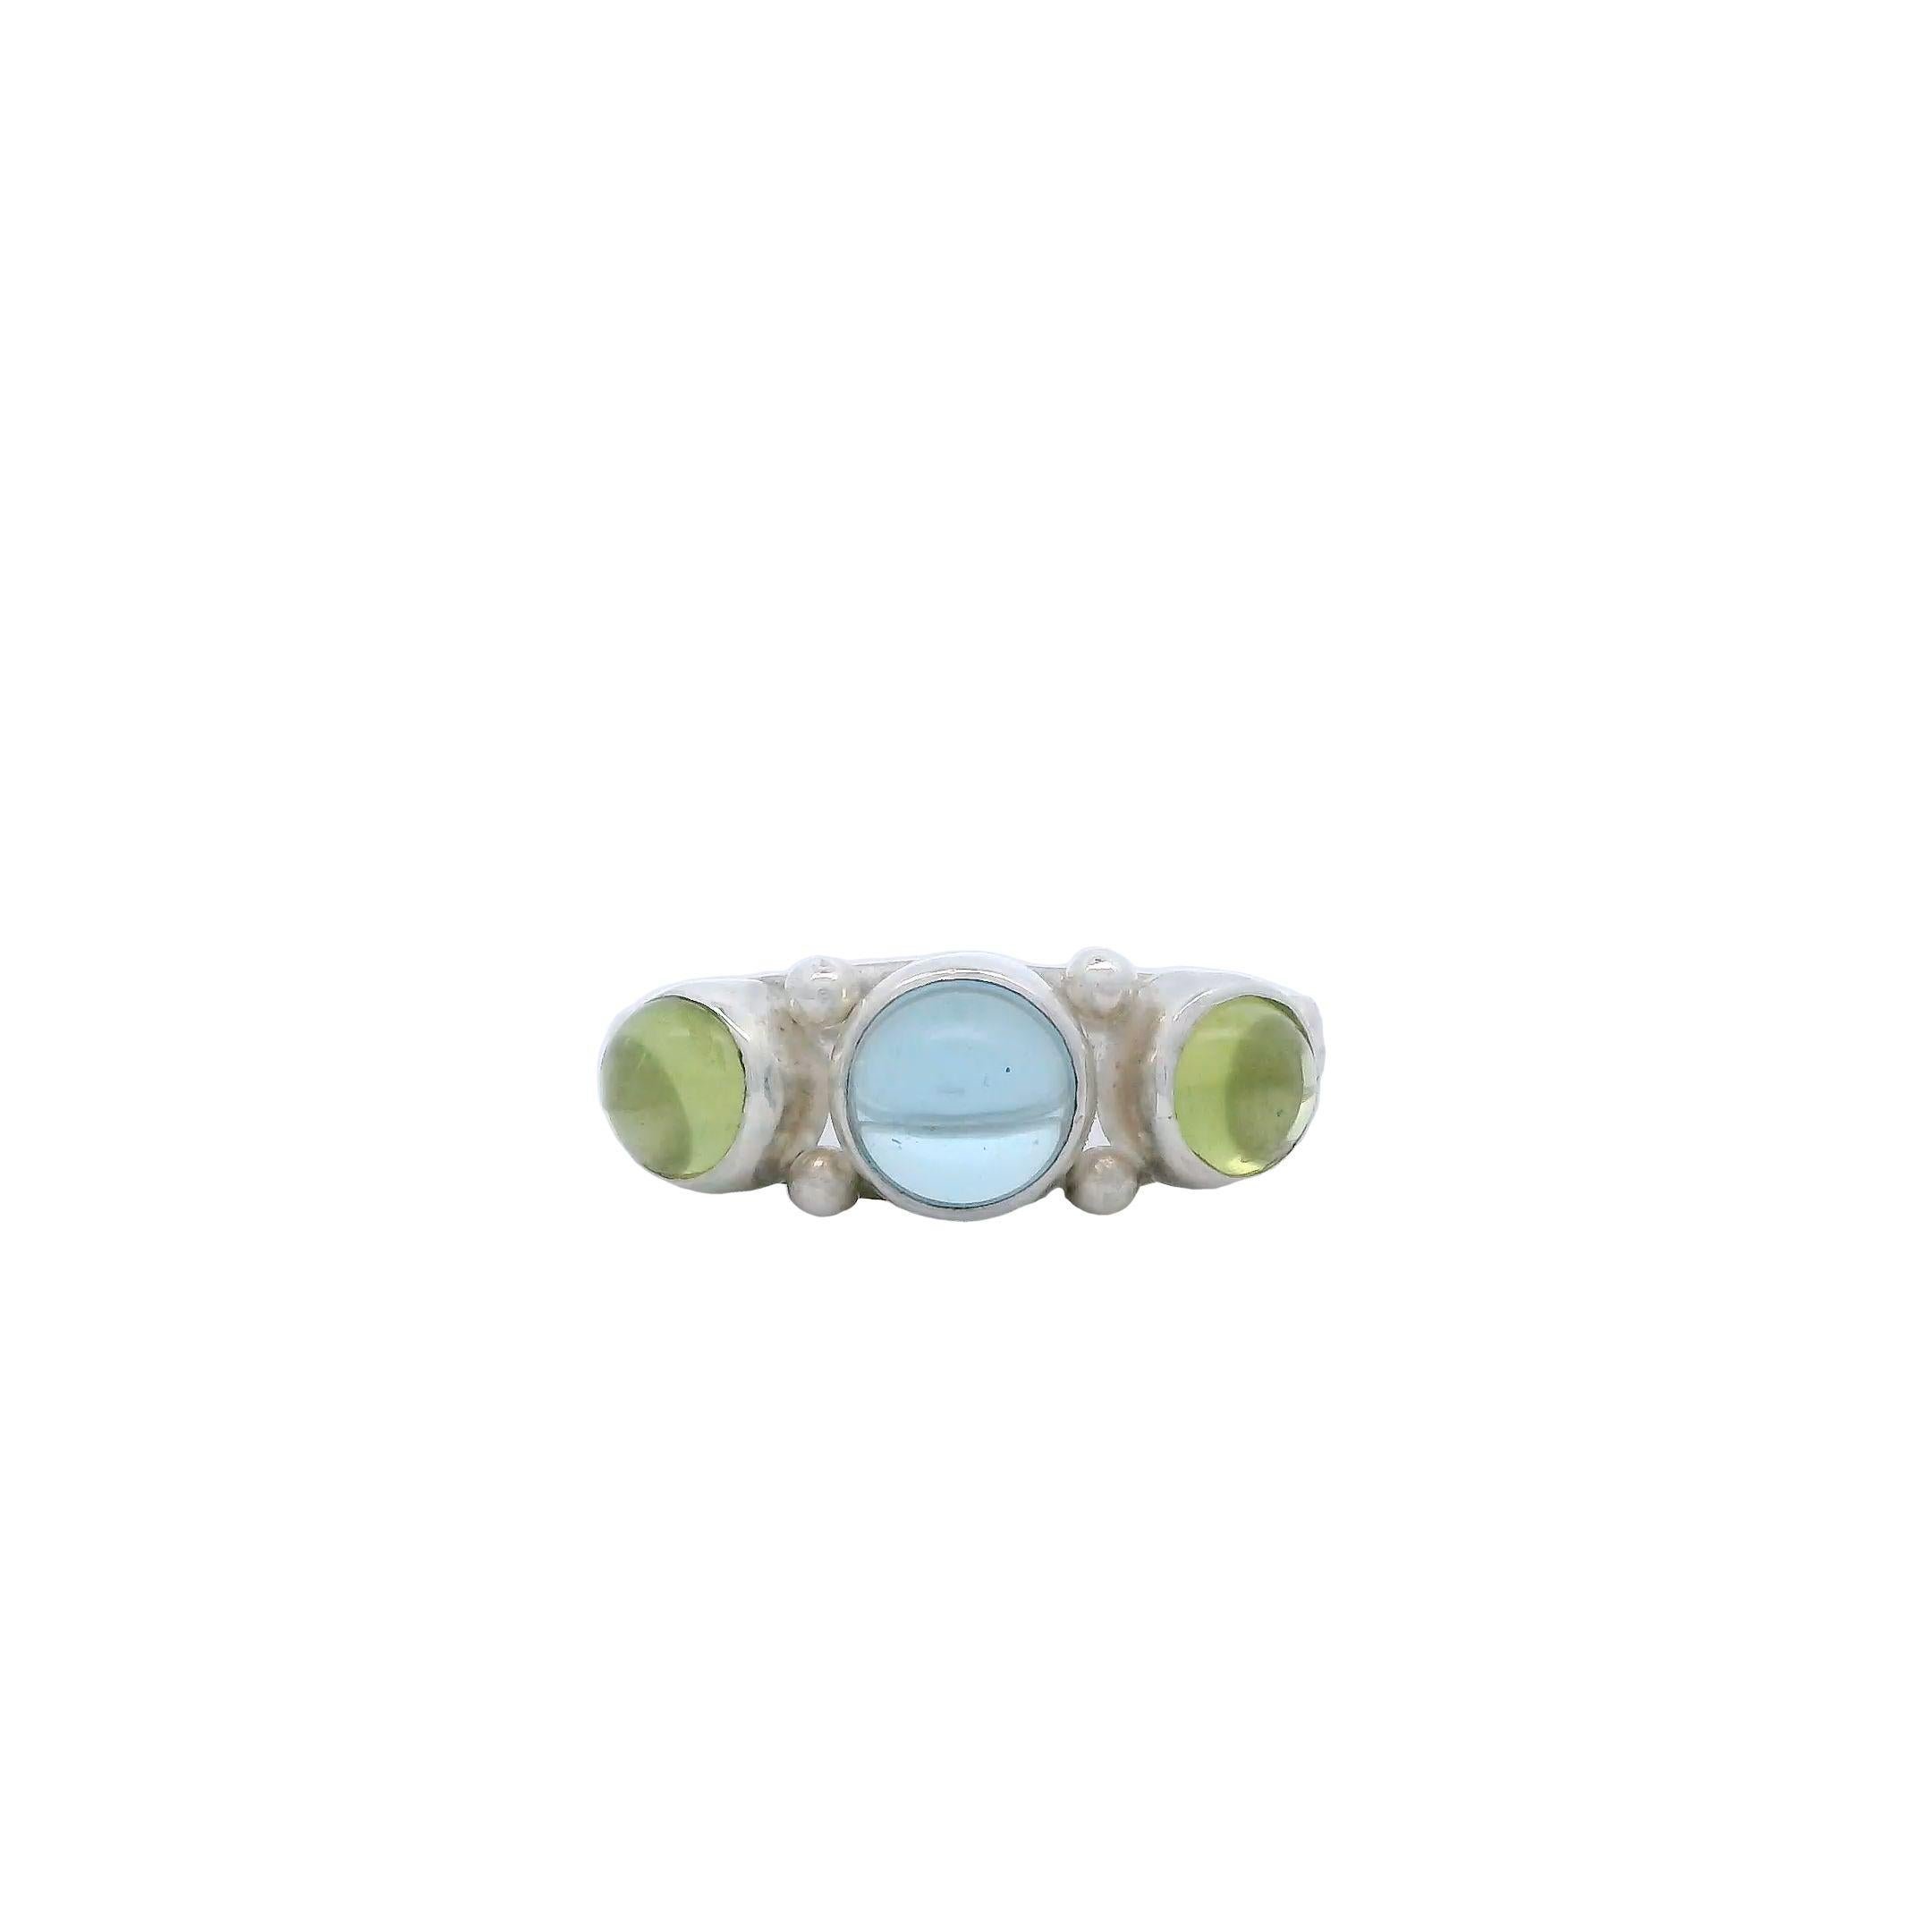 Lose yourself in this captivating cabochon blue topaz and peridot ring, hand fabricated by Lynn Kathyrn Miller, a renowned artisan and owner at Lynn K Designs. The soothing hues of the water and lush tropical plants set in a cool sterling silver